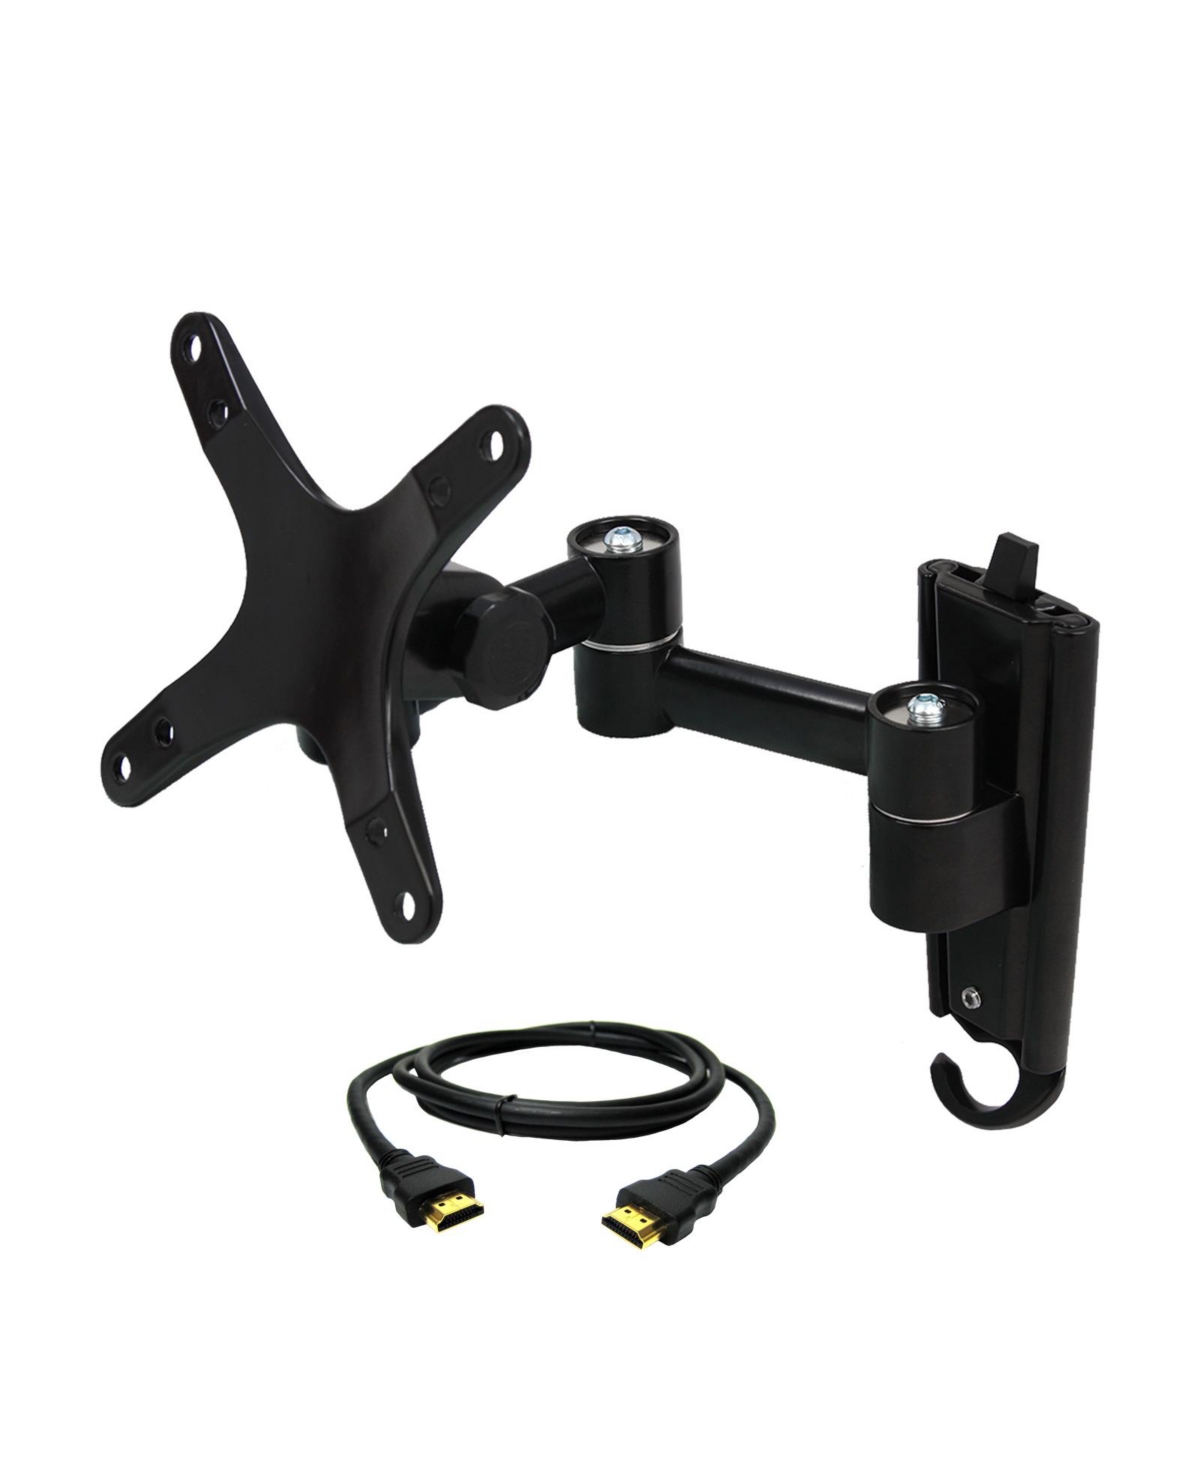 Full Motion Wall Mount for 13-30 in. Displays with Hdmi Cable - Black